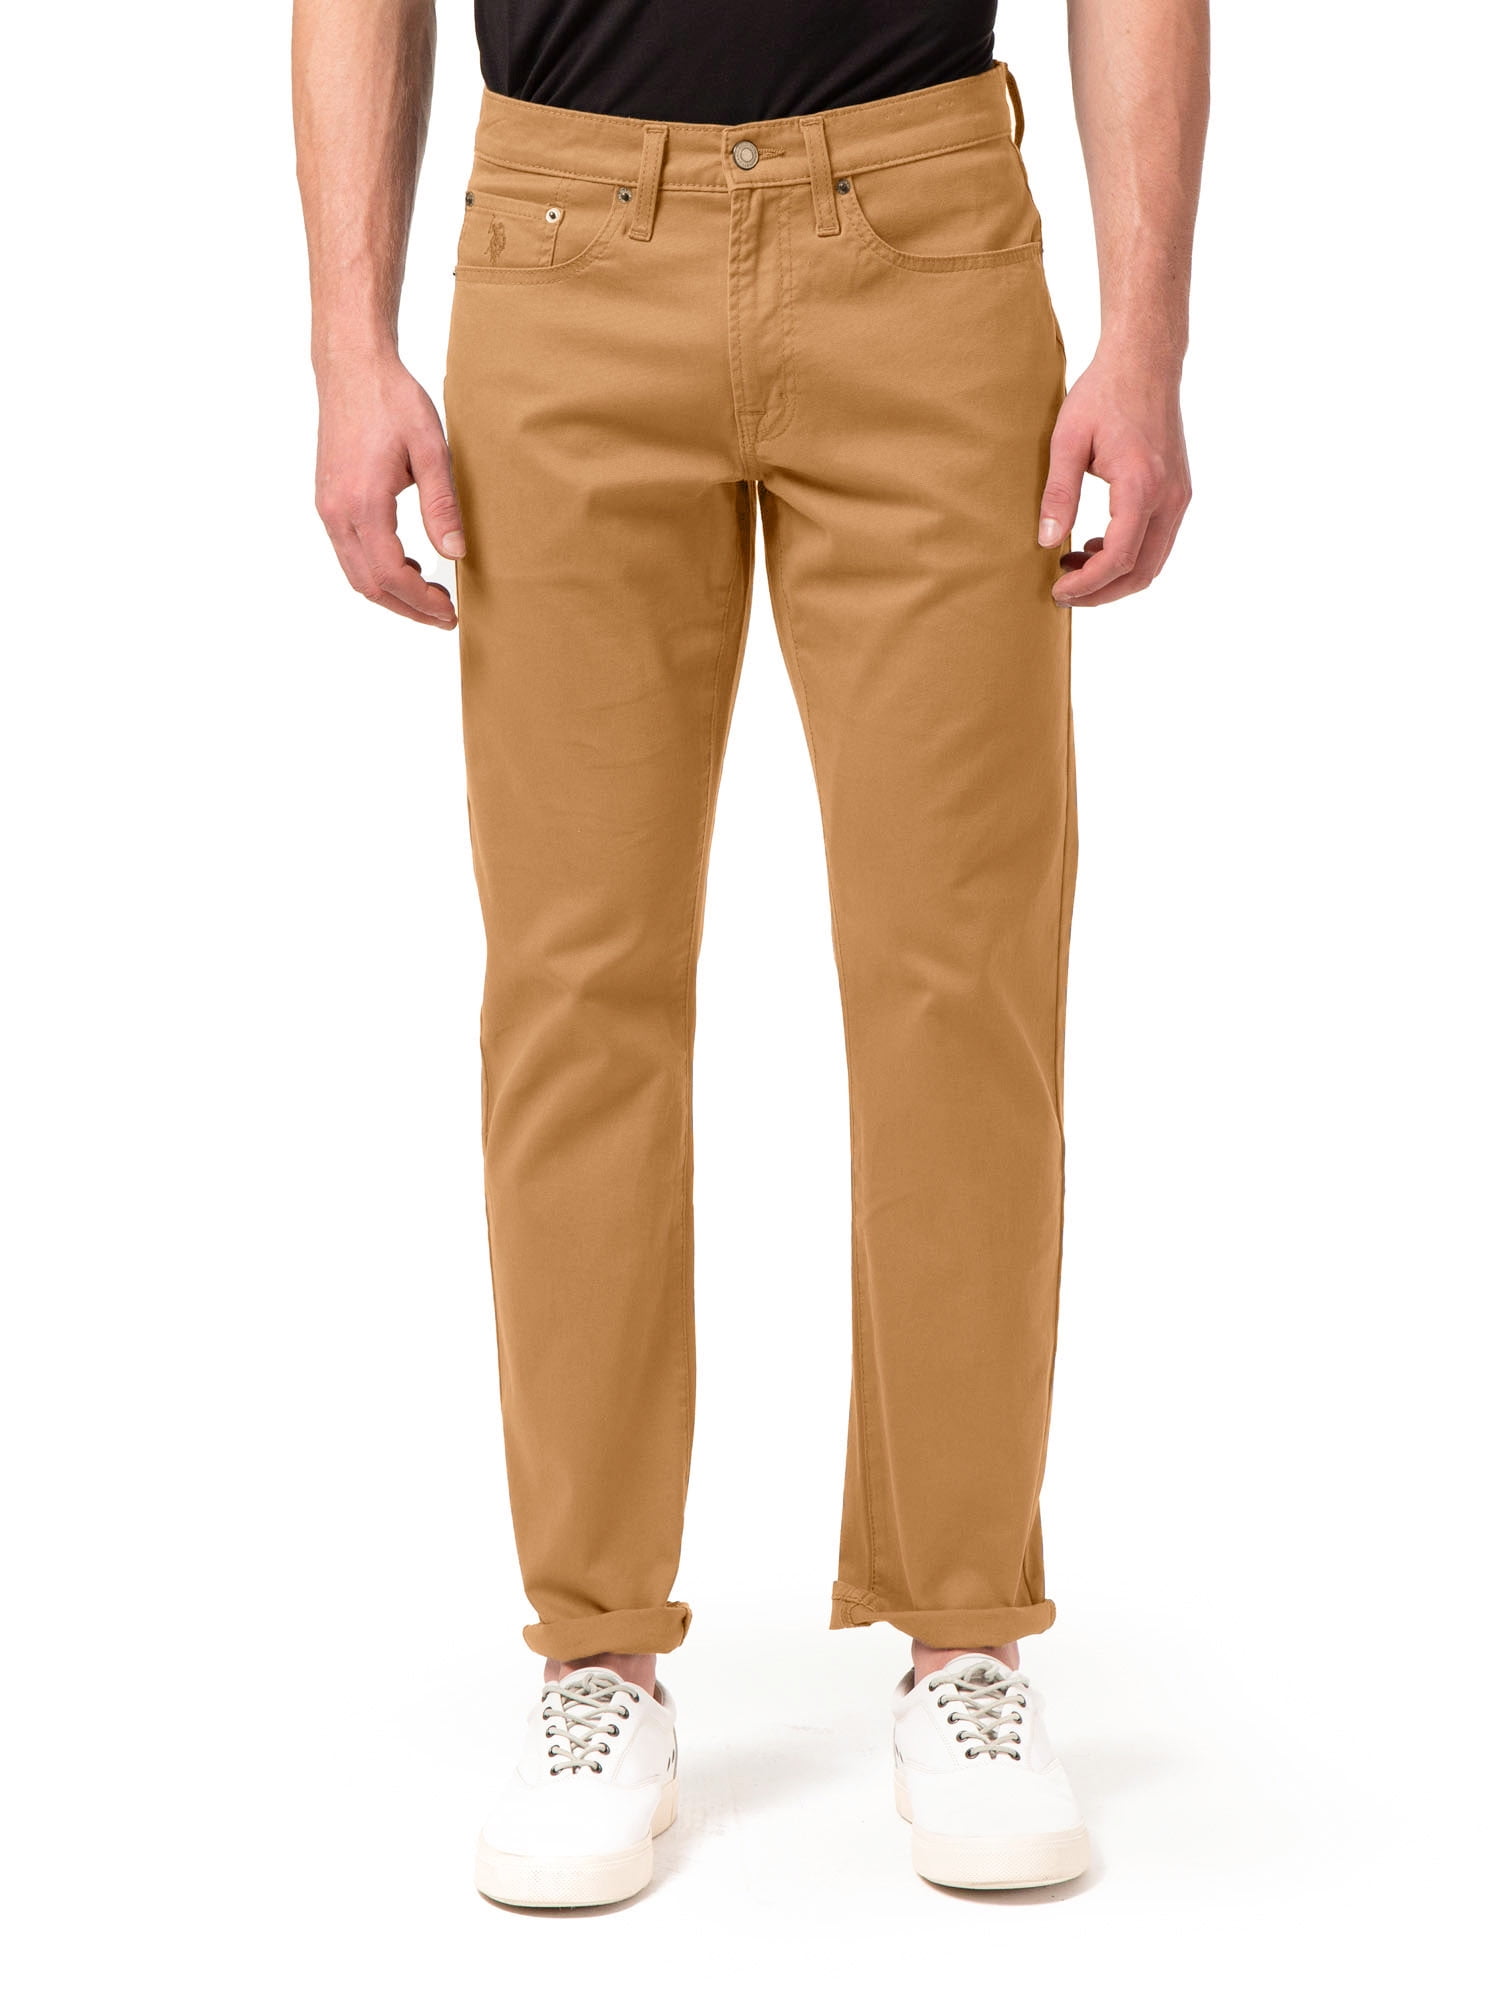 Buy U.S. POLO ASSN. Men's Regular Trousers (USTRO0644_Olive at Amazon.in